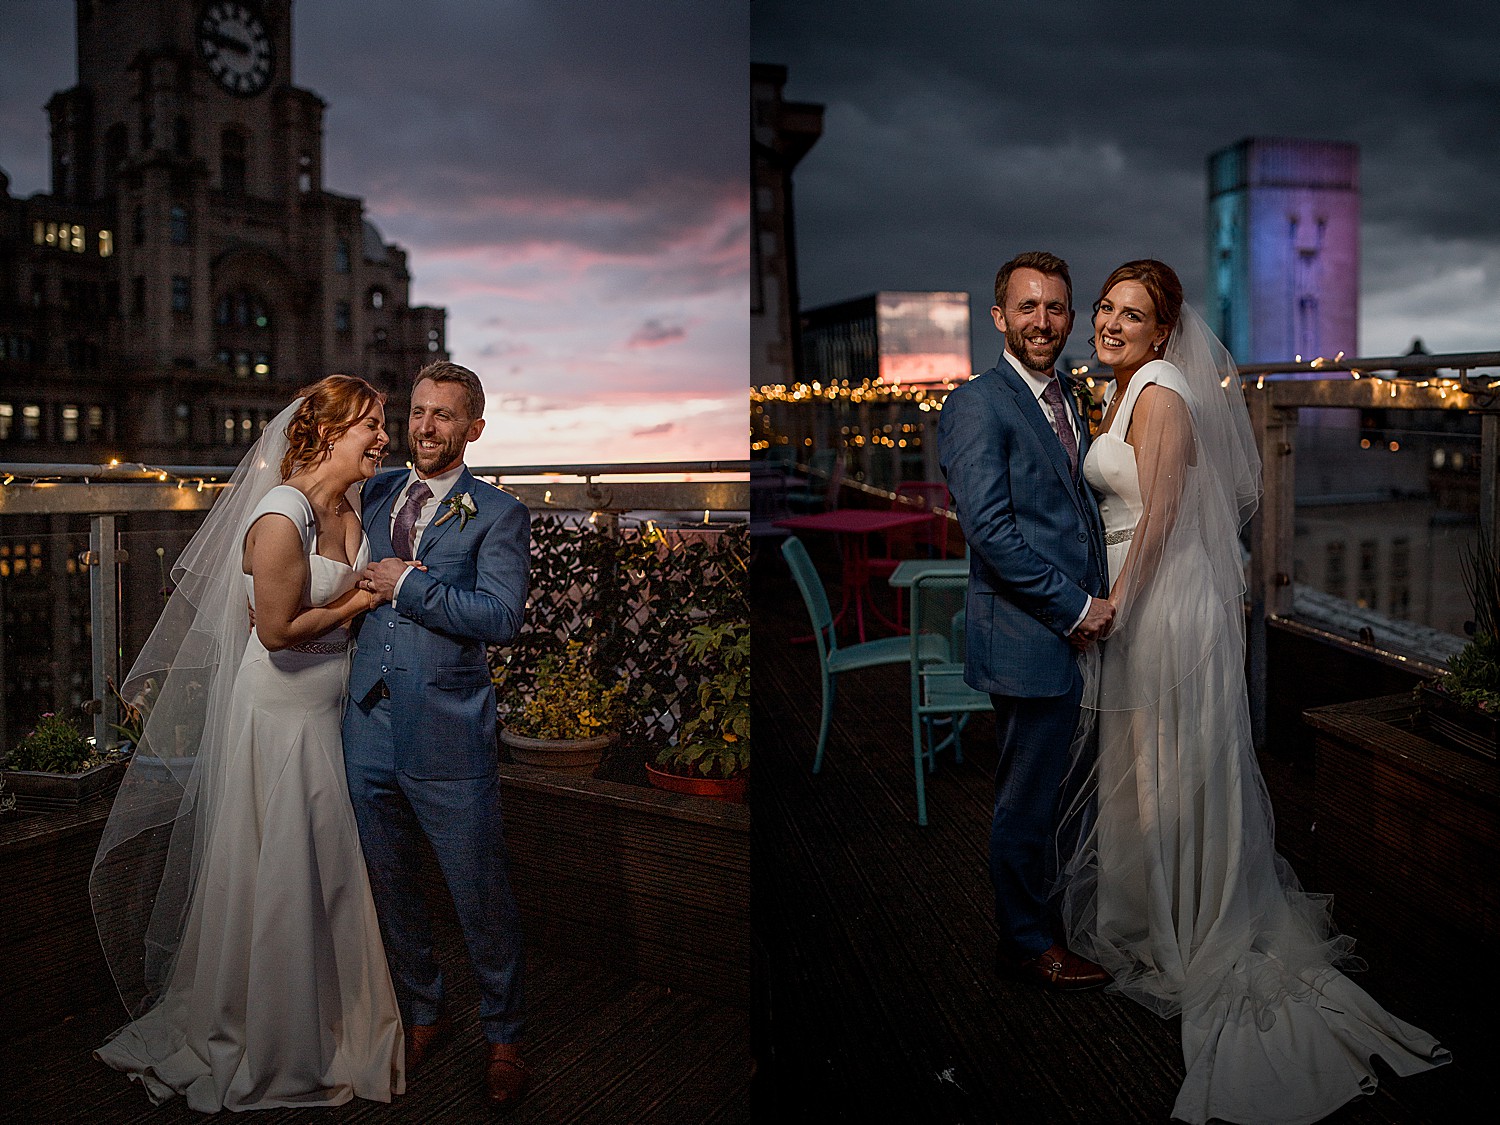 Sunset portraits at this Liverpool wedding